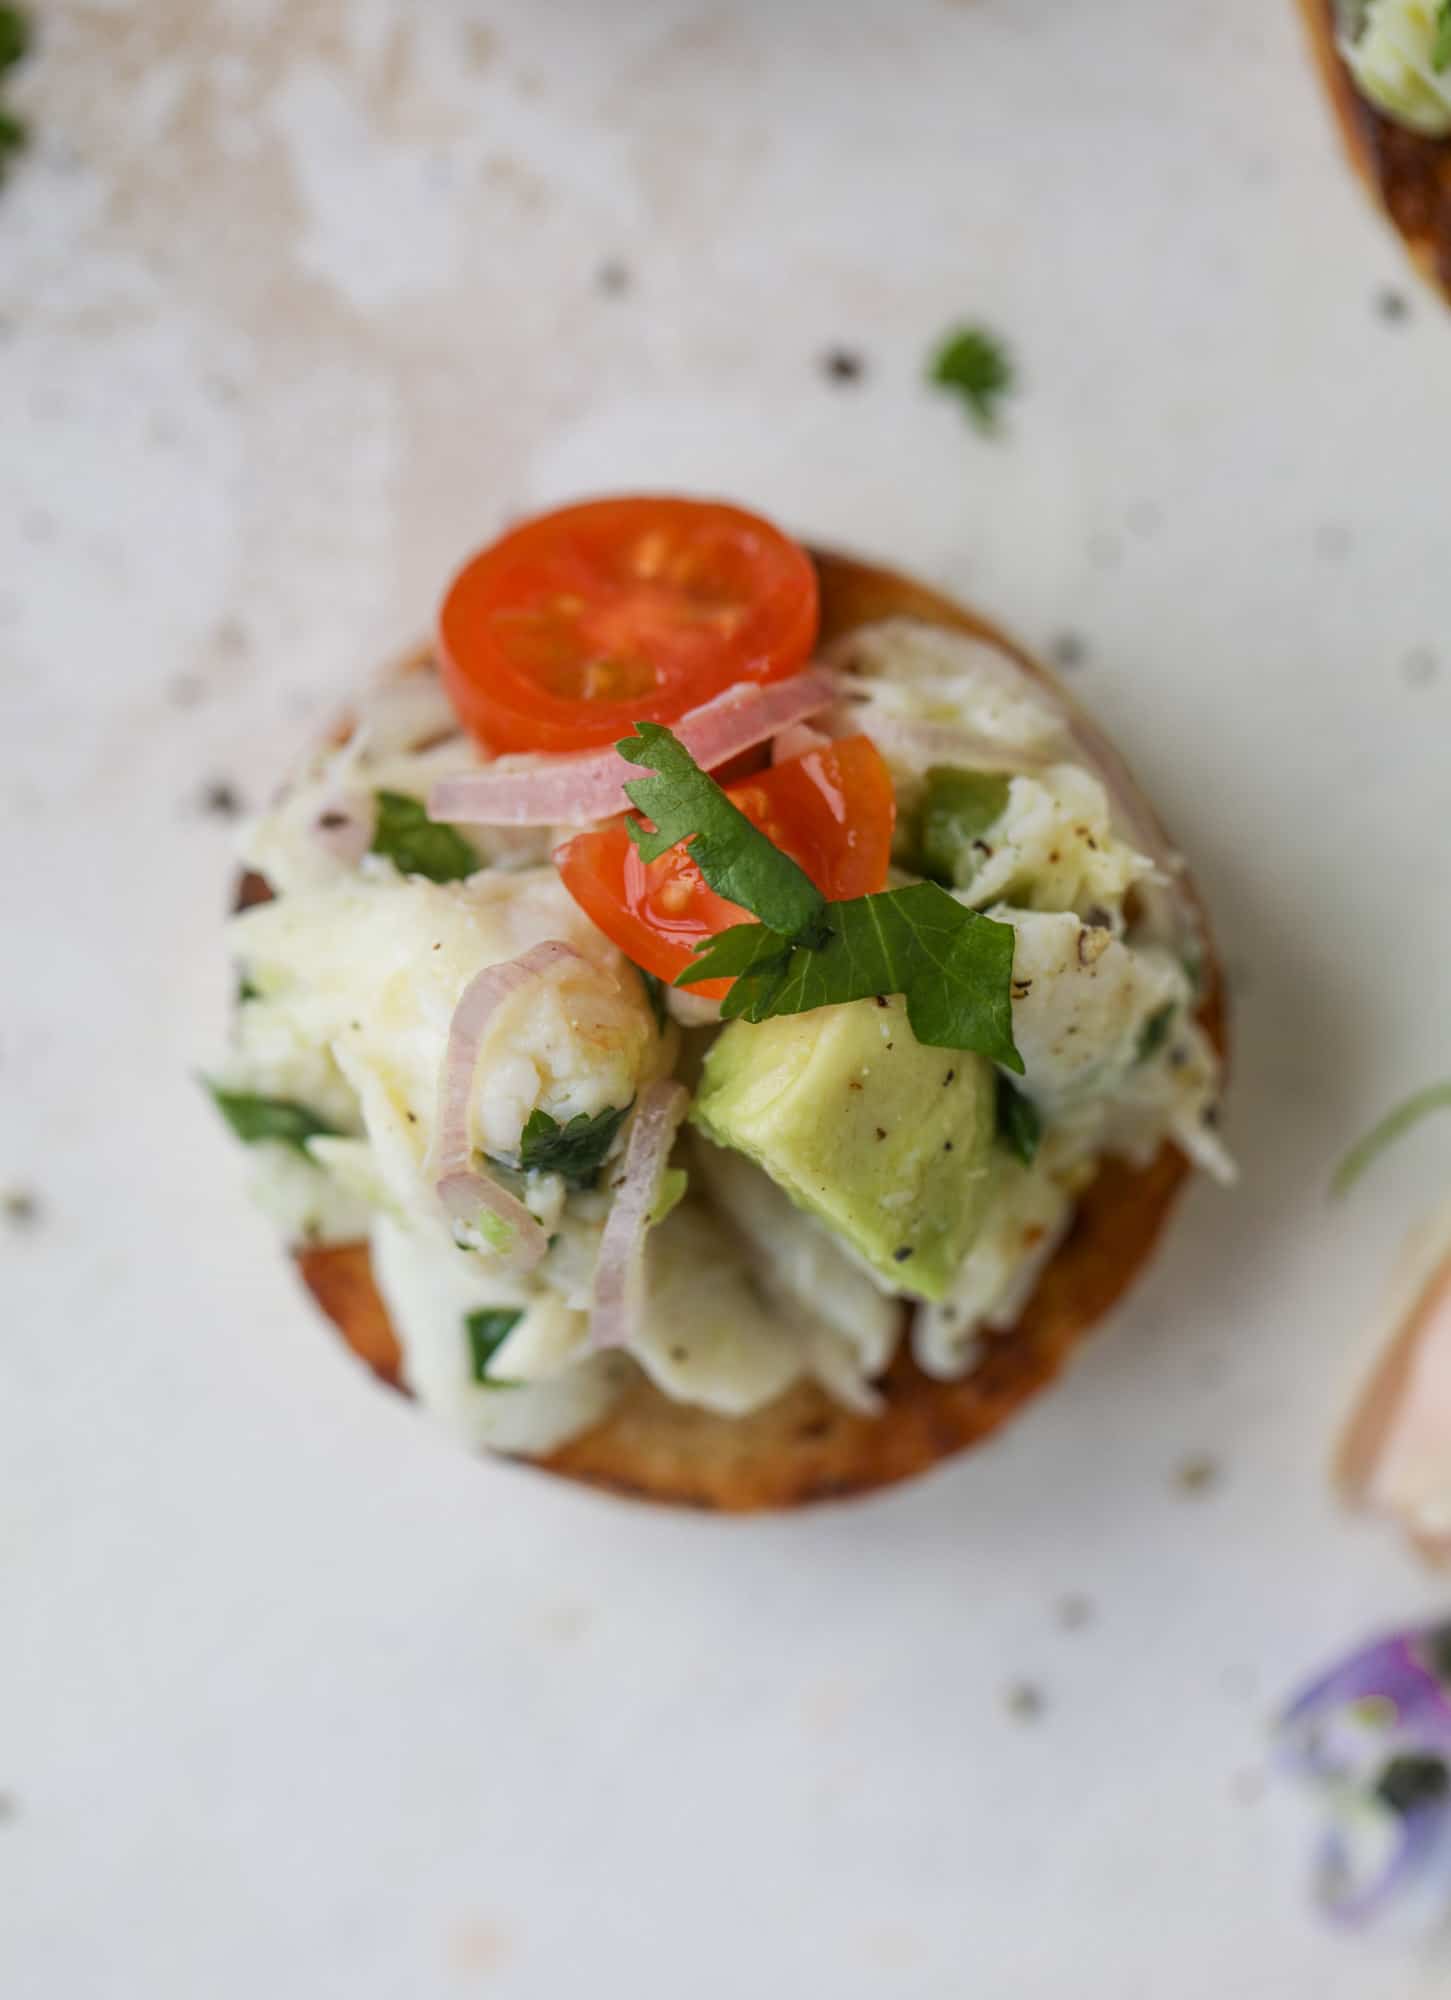 The cutest crab salad toasts are perfect for a snack, appetizer or light meal with a greens salad. This avocado crab salad is so refreshing and light!